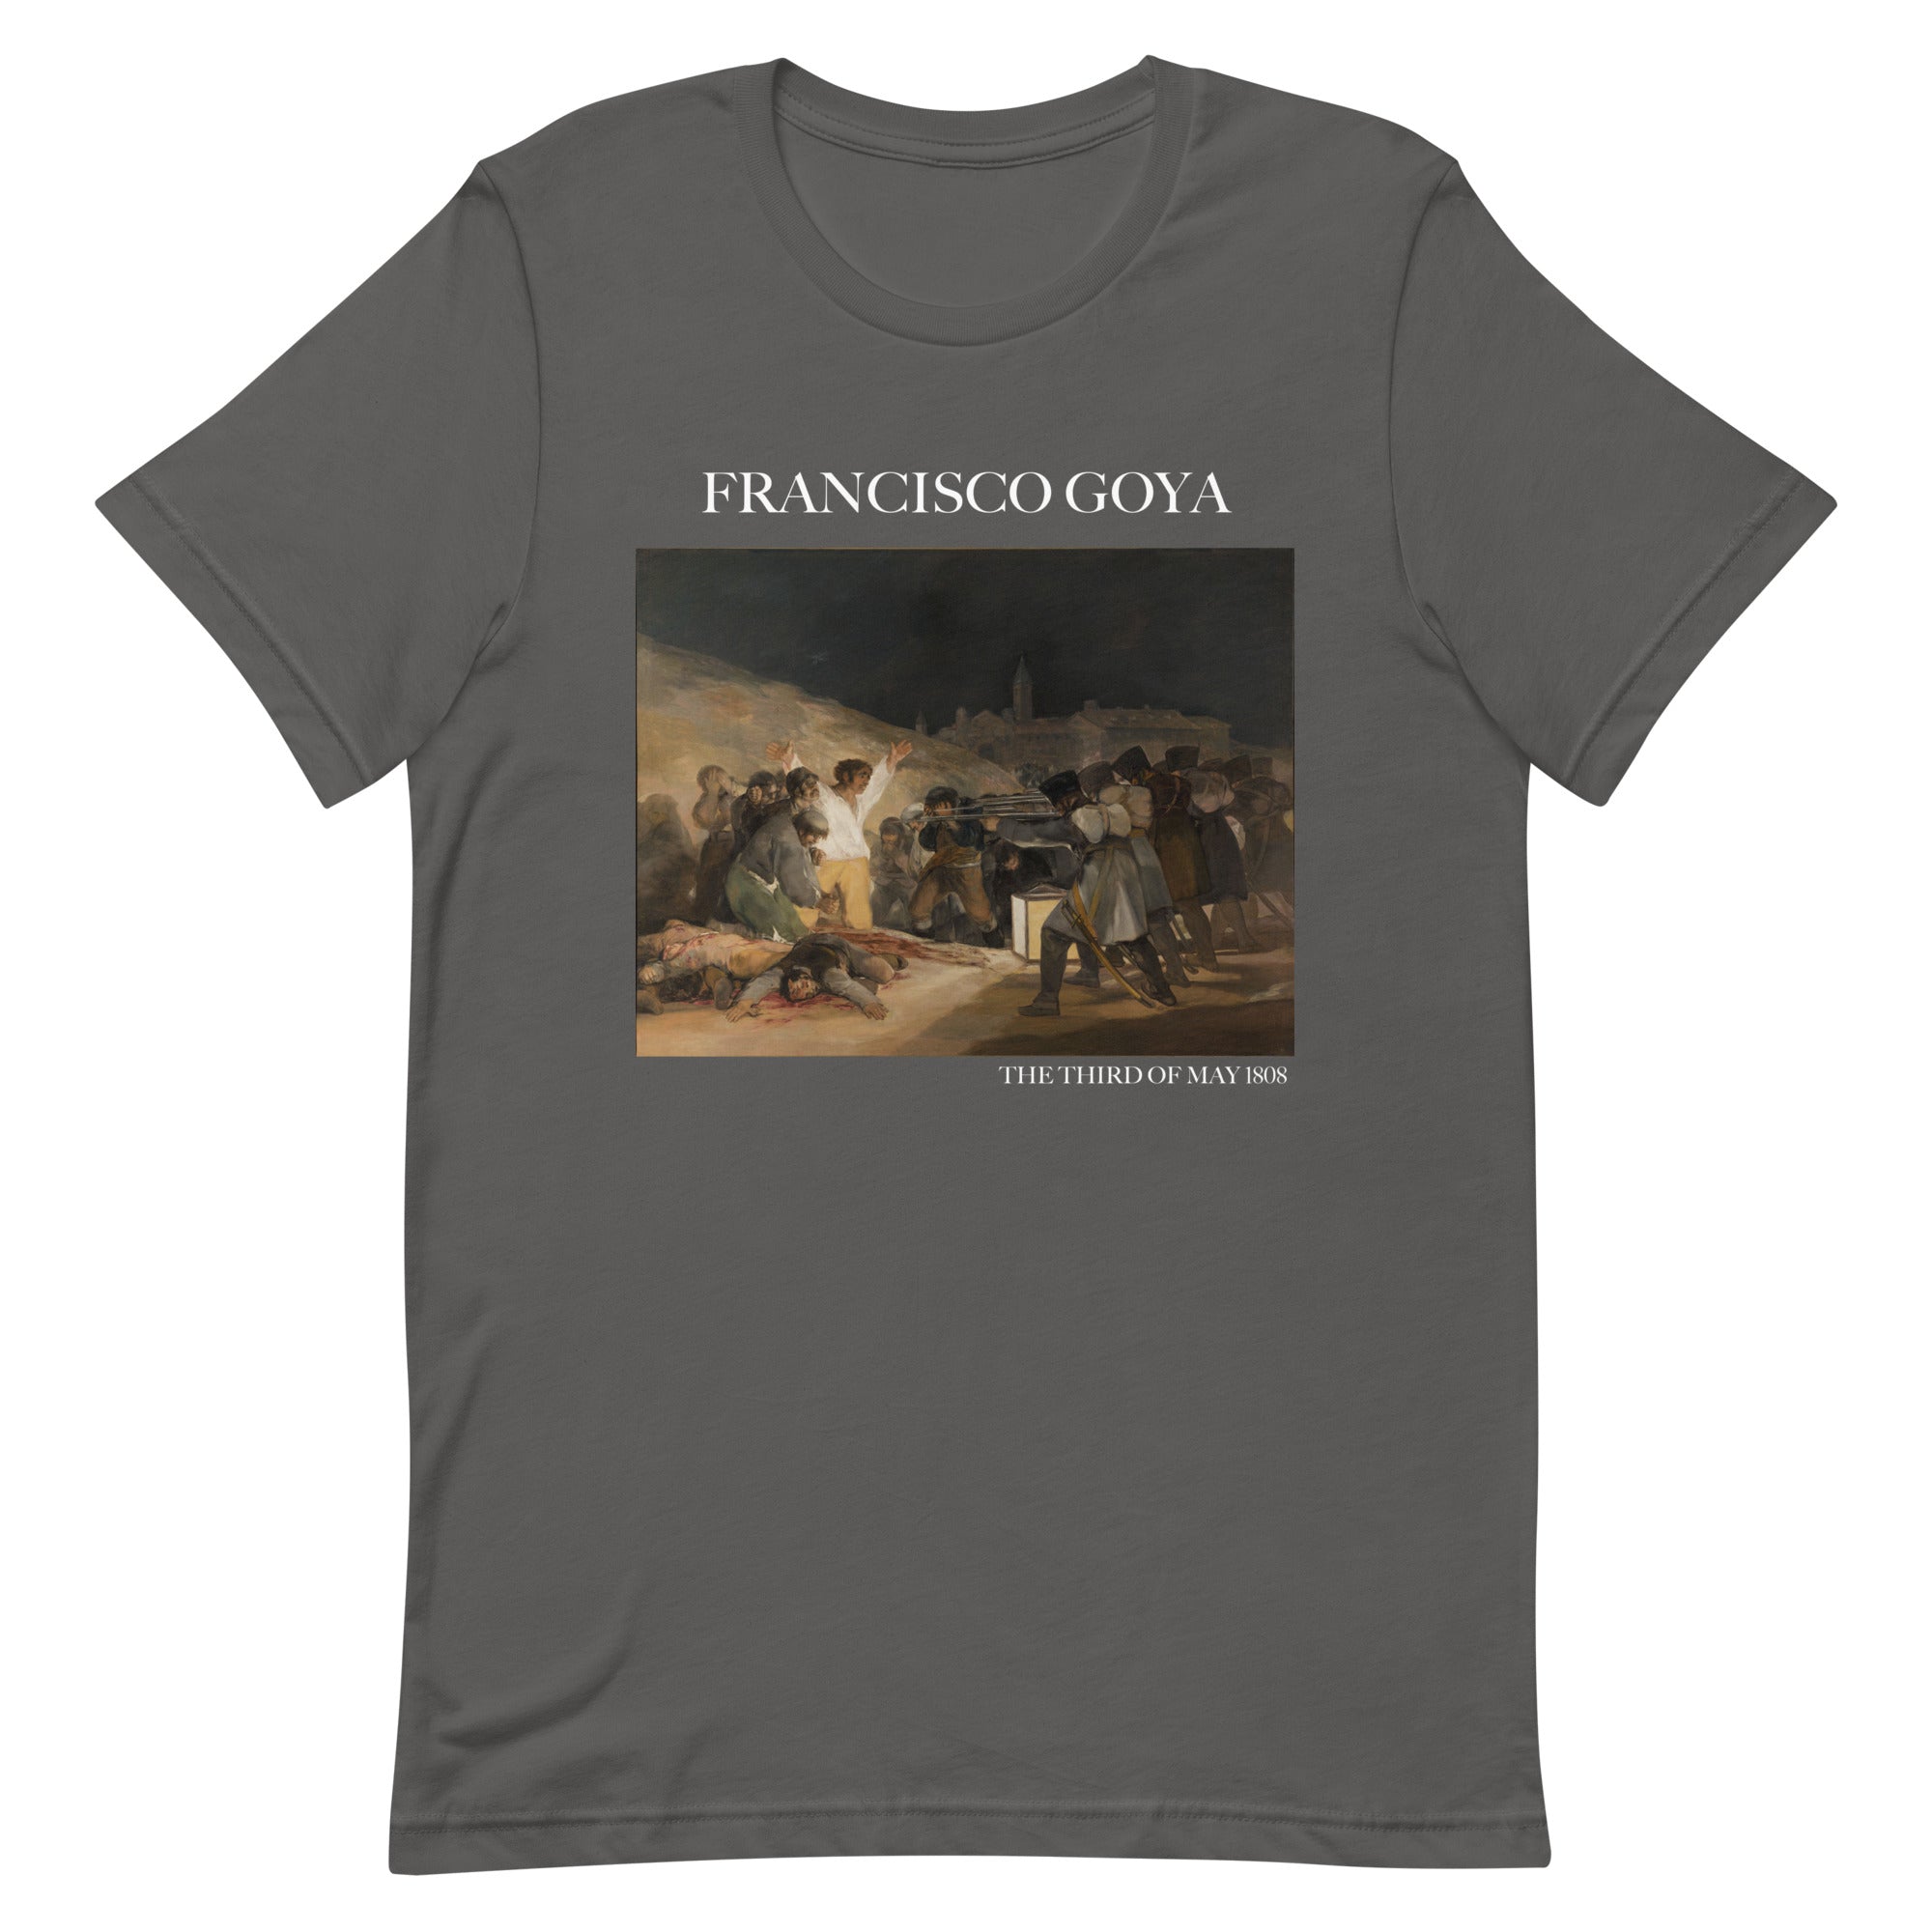 Francisco Goya 'The Third of May 1808' Famous Painting T-Shirt | Unisex Classic Art Tee